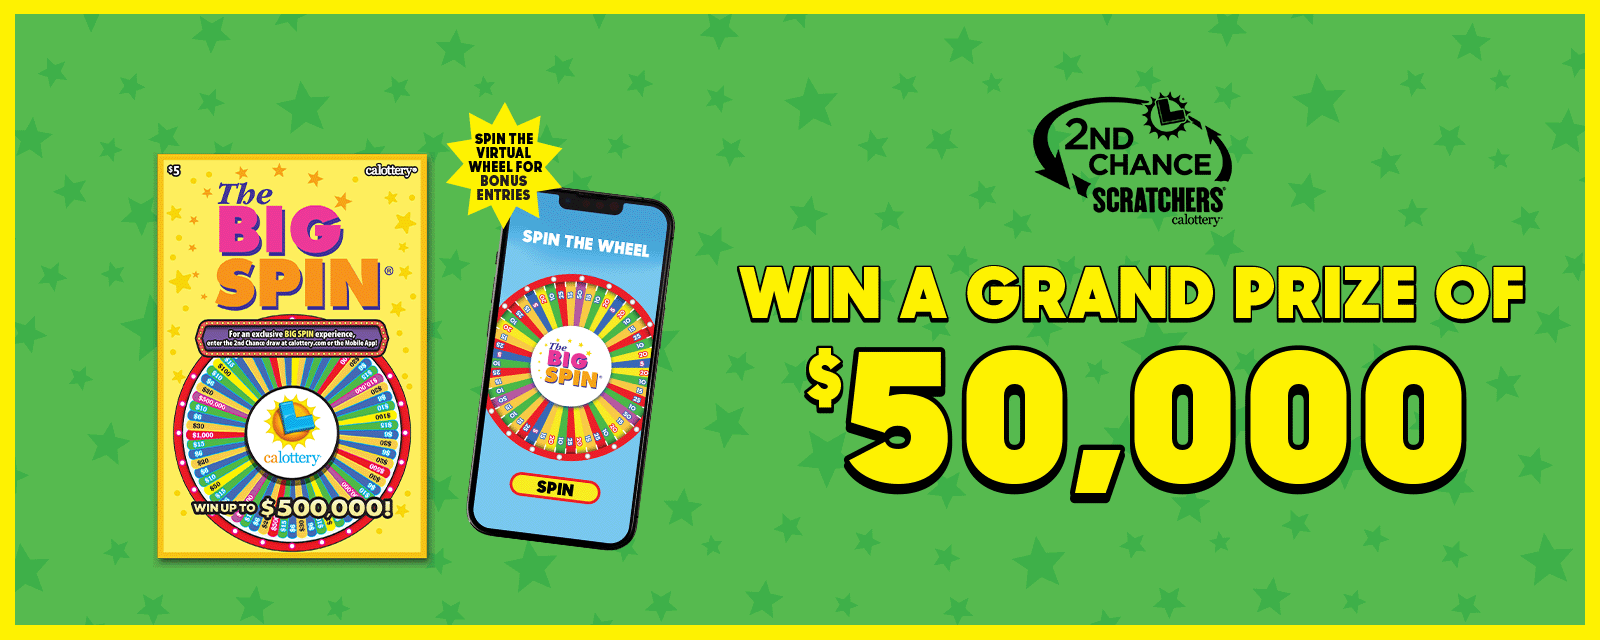 Spin the virtual wheel for bonus entries, Win a grand prize of $50,000